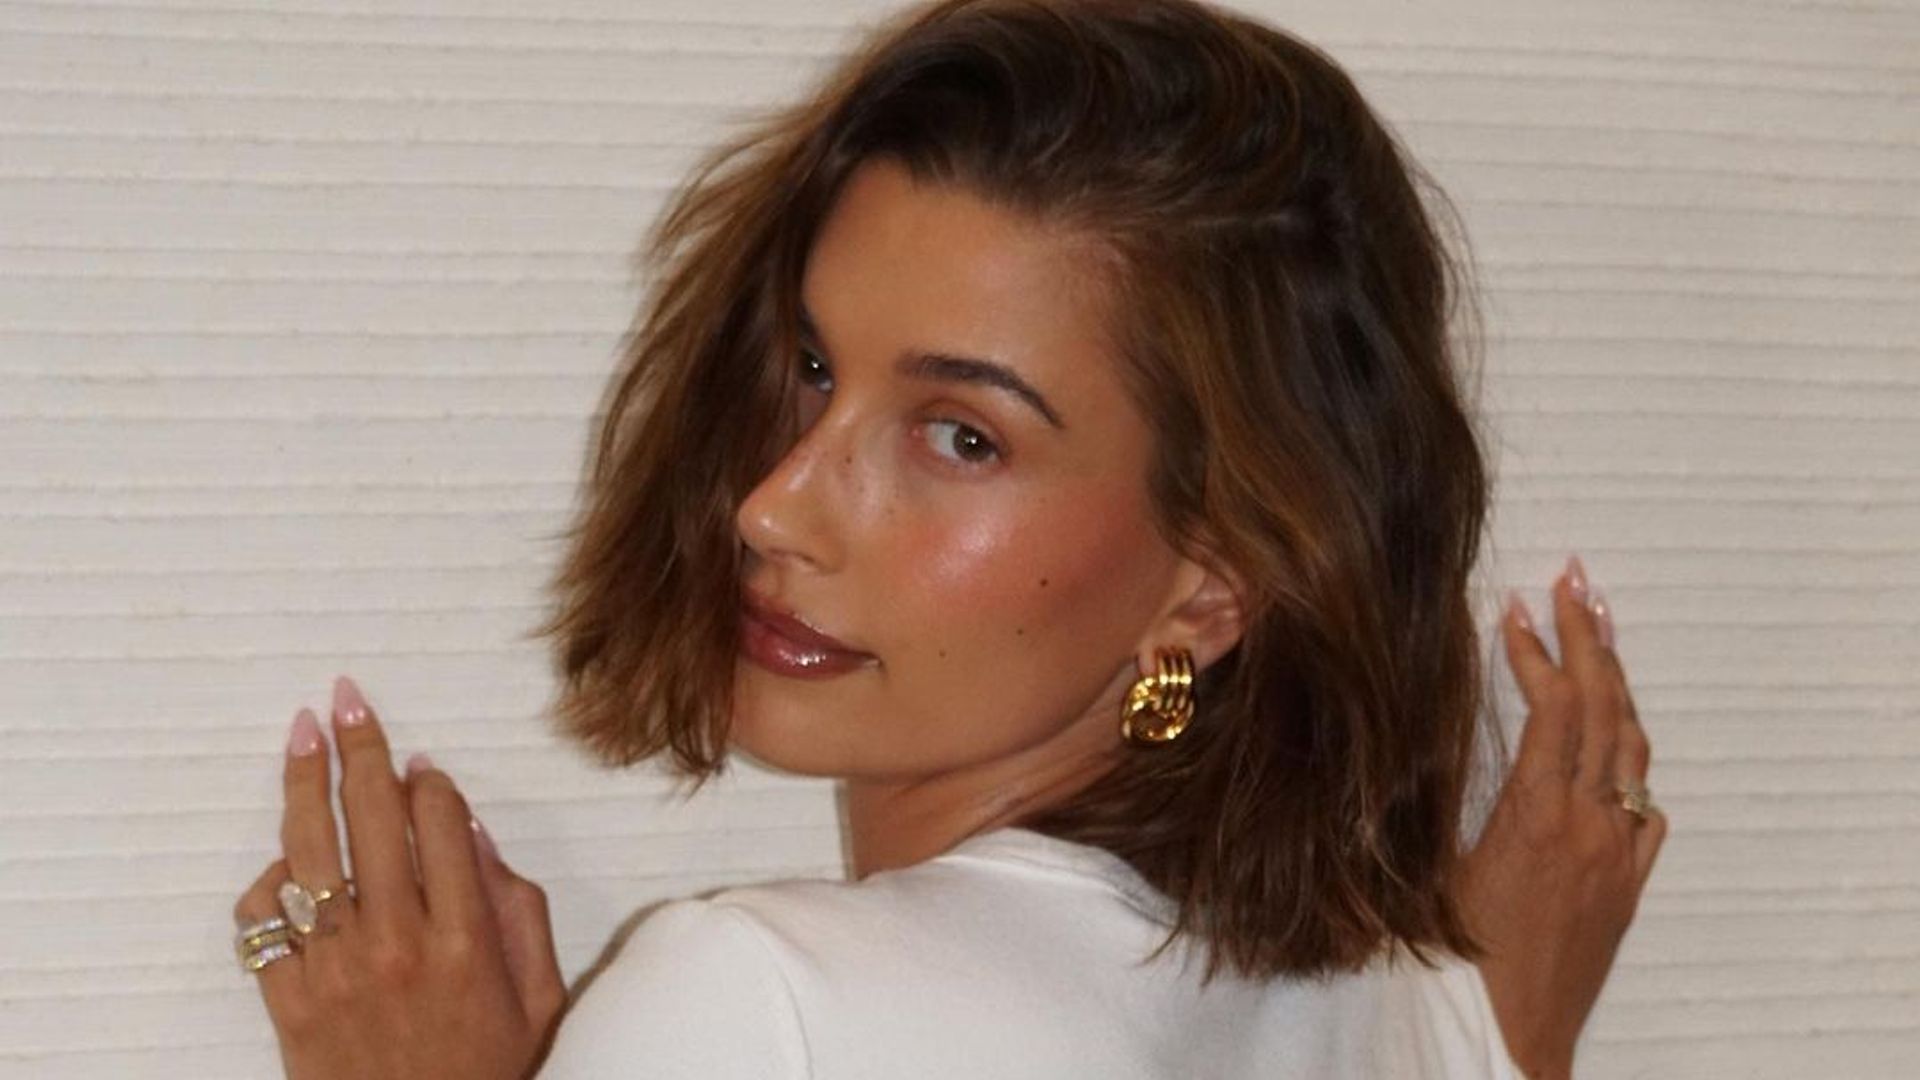 Hailey Bieber brings back the iridescent manicure